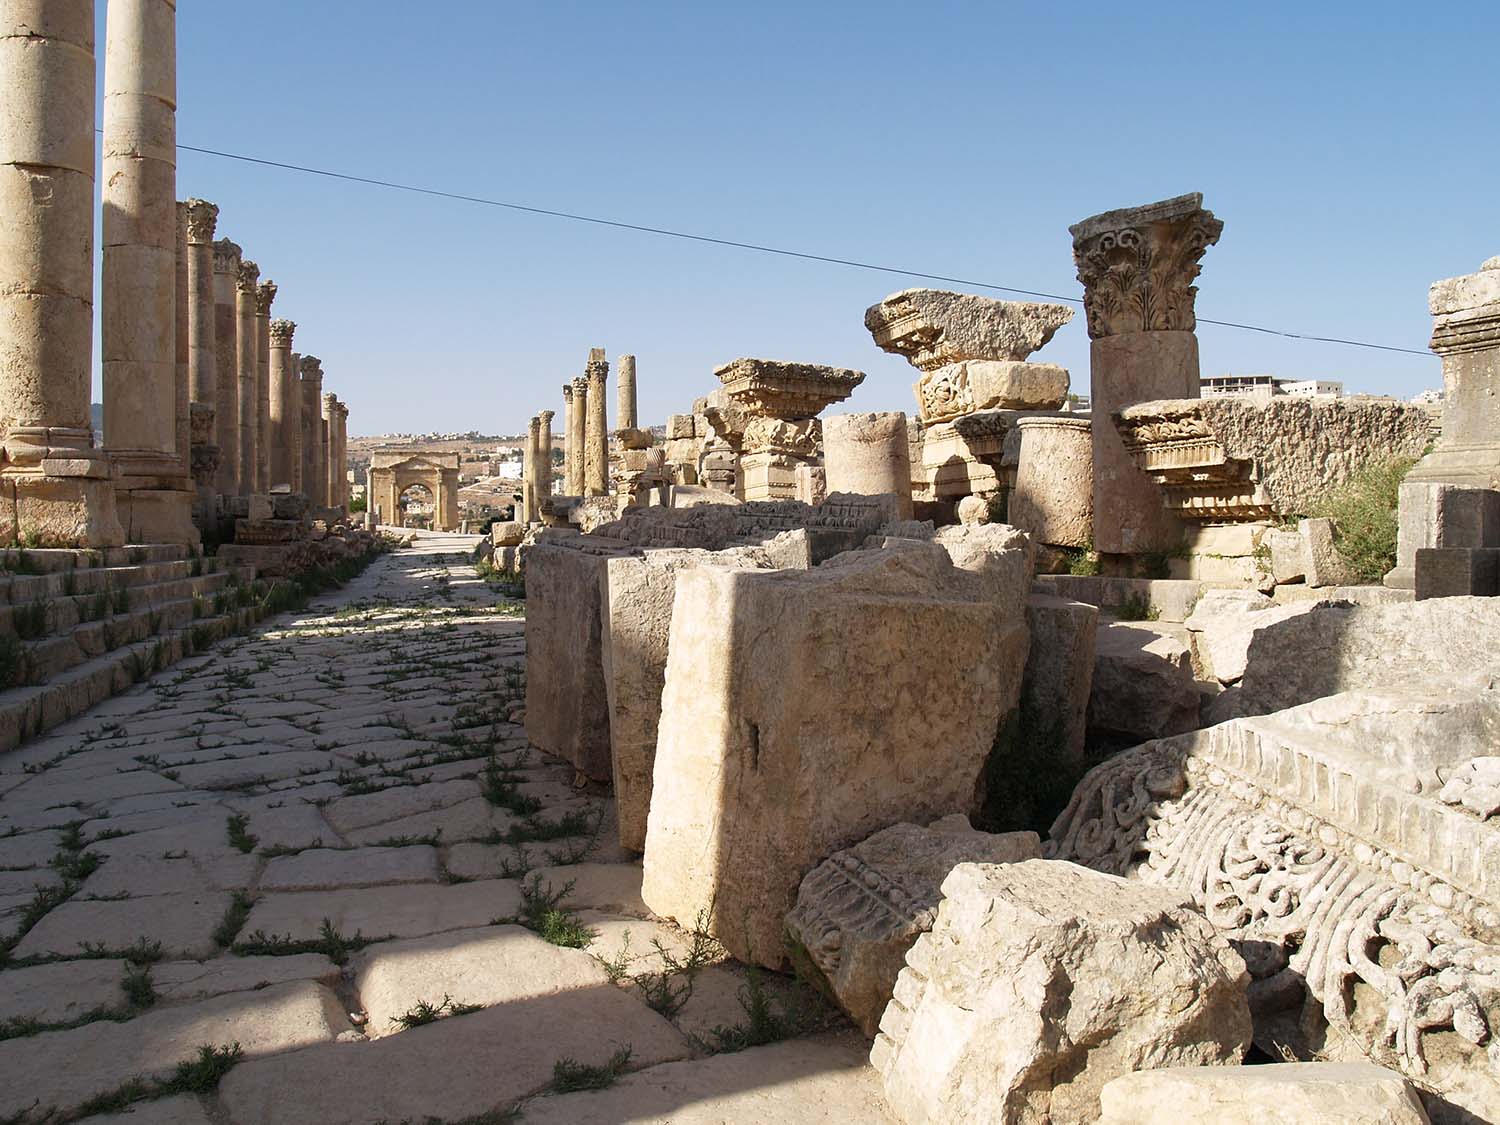 Northward view, ruined columns along the Cardo Maximus; North Tetrapylon in the background